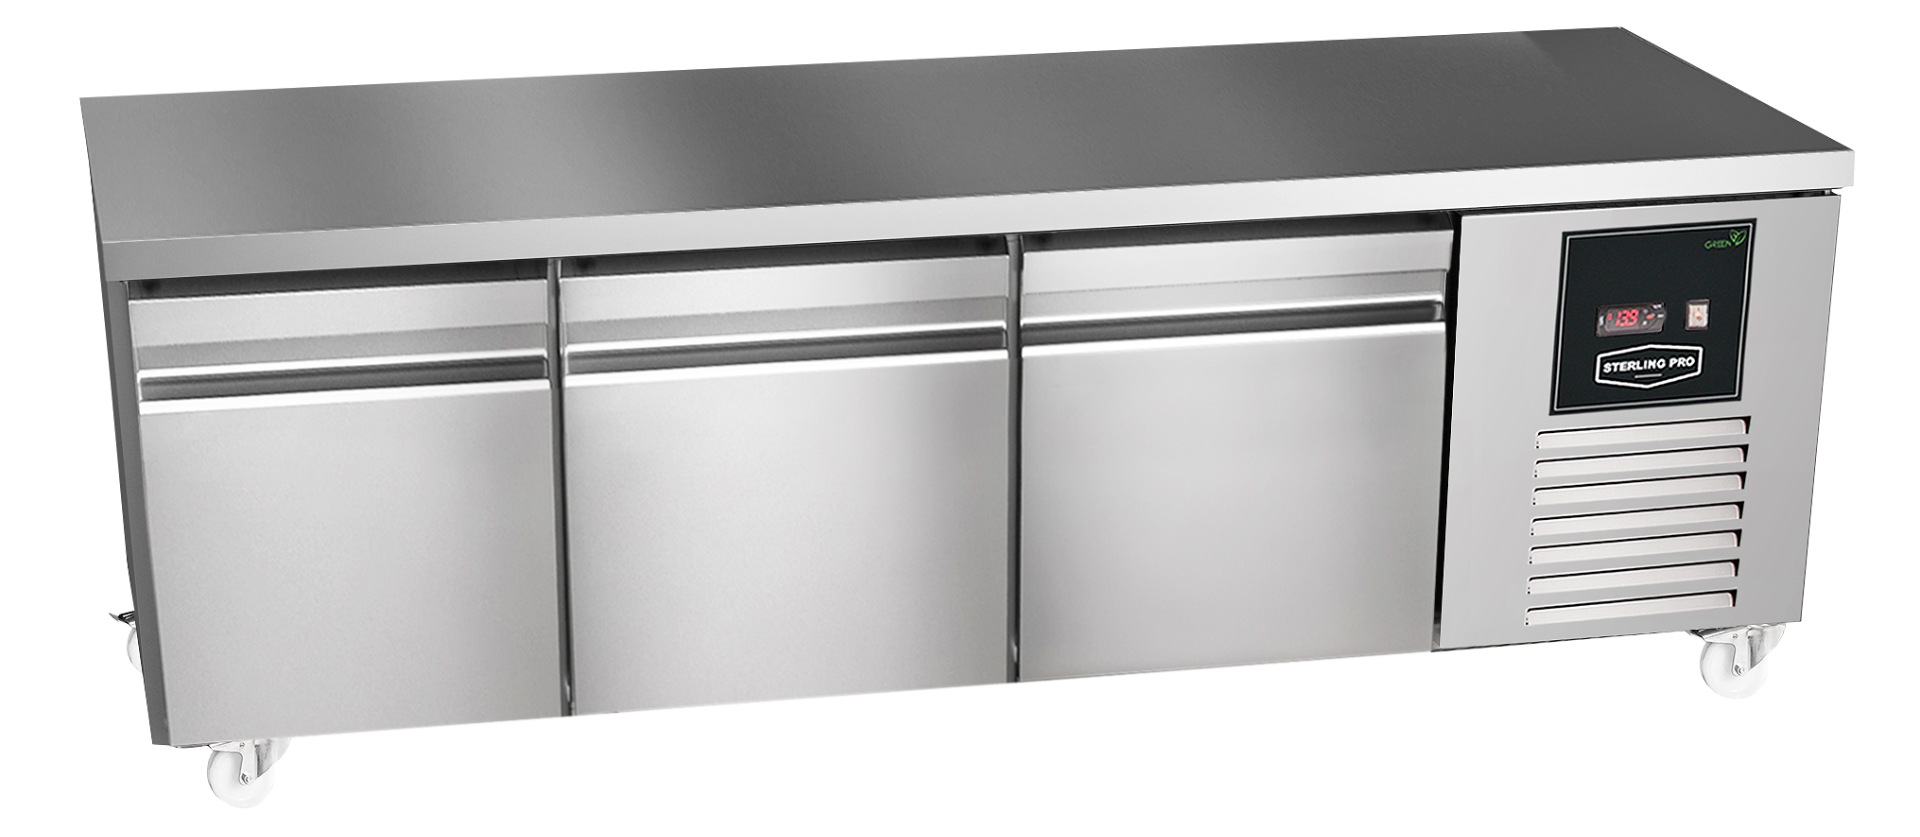 Sterling Pro Green SPI-B-180 Stainless Steel Low-Height Fridge Counter  3 x 2/3 Drawers 2 Years Parts & Labour